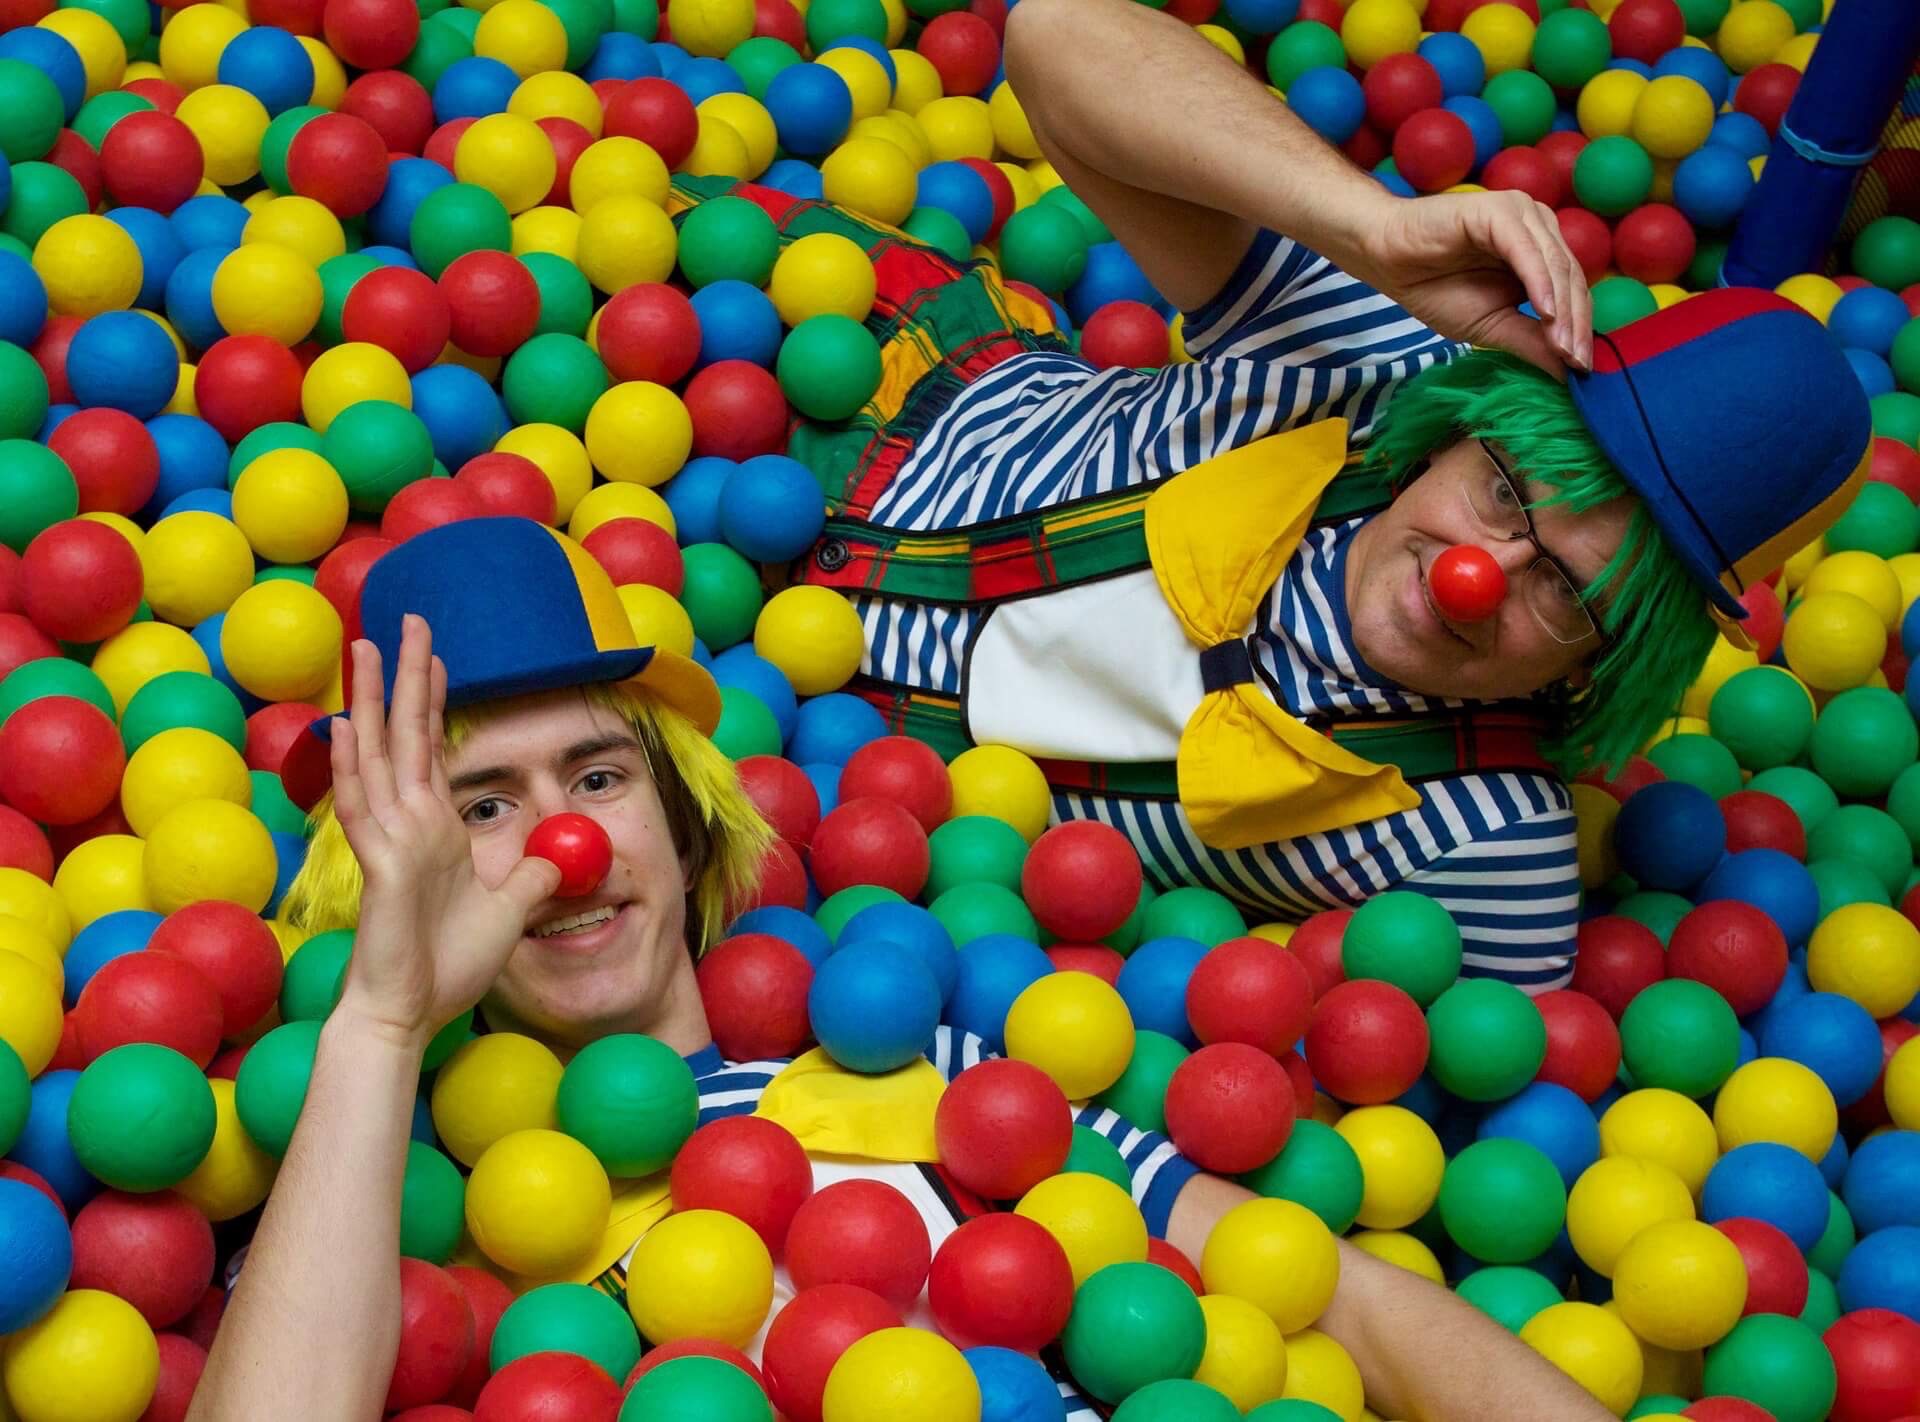 Two clowns immersed in colorful plastic balls, one clown thumbing his nose. Photo illustration